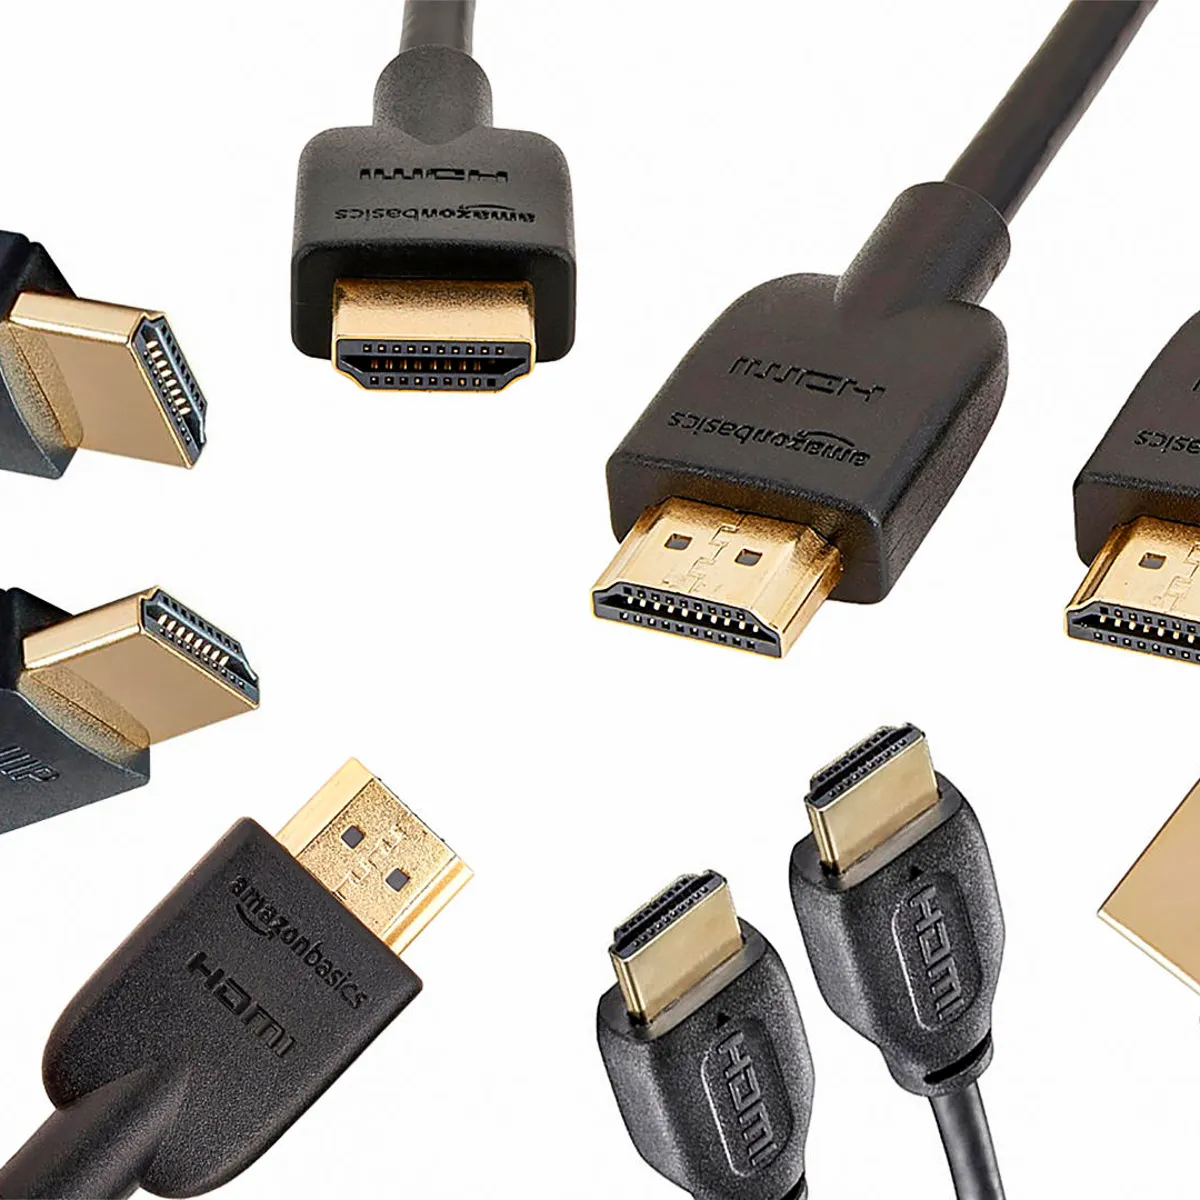 Best HDMI Cable For 4K TV